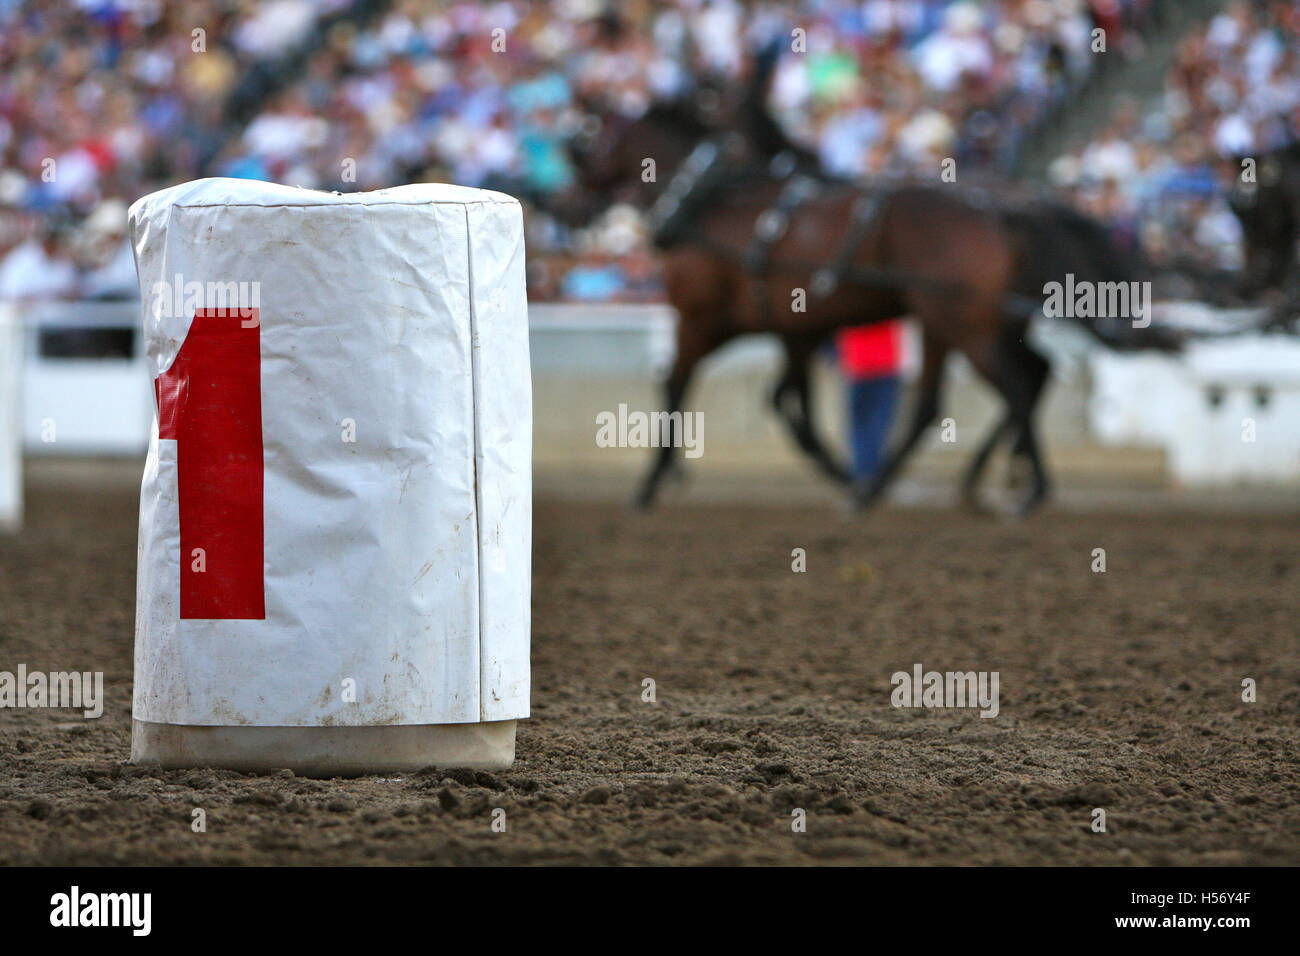 Looking out at the crowd as it stirs from behind Barrel No.1 at the Calgary Stampede Chuck Wagon Races Stock Photo